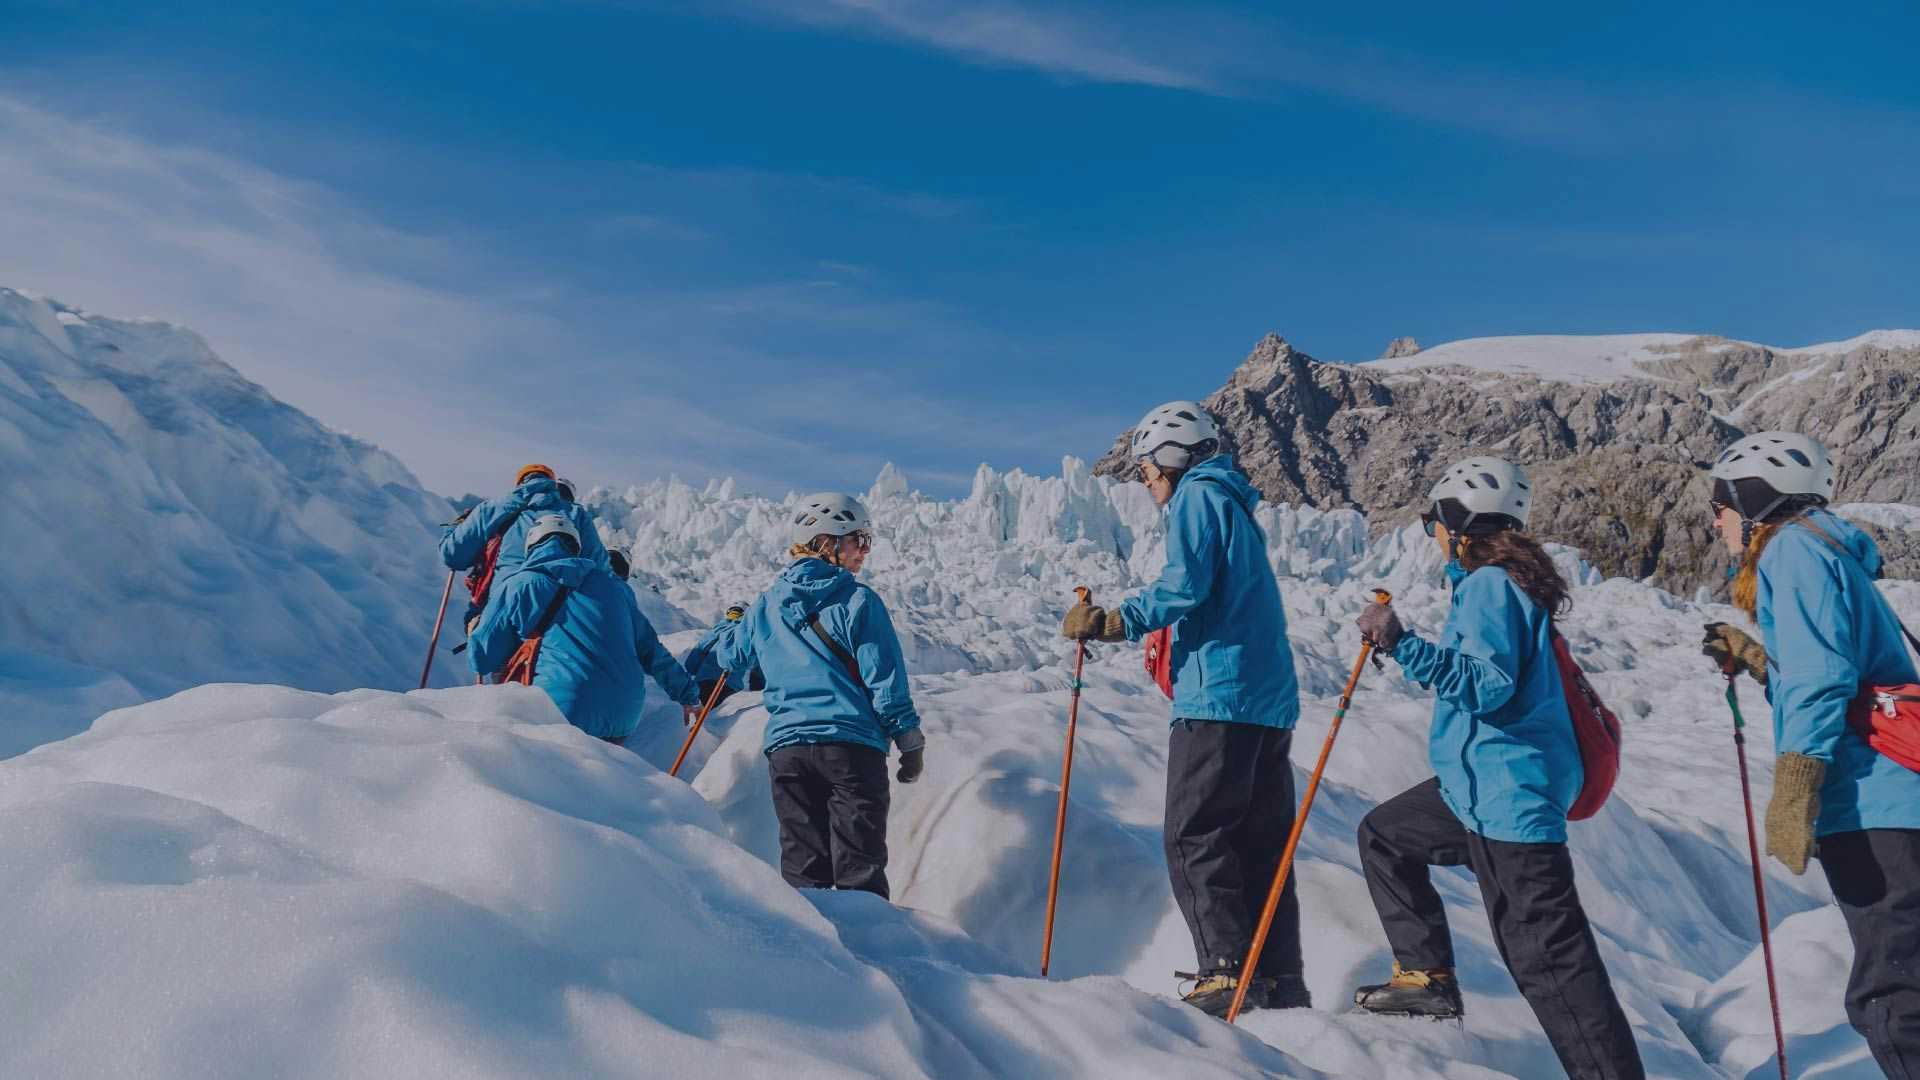 Group of people hiking on Franz Josef Glacier in New Zealand